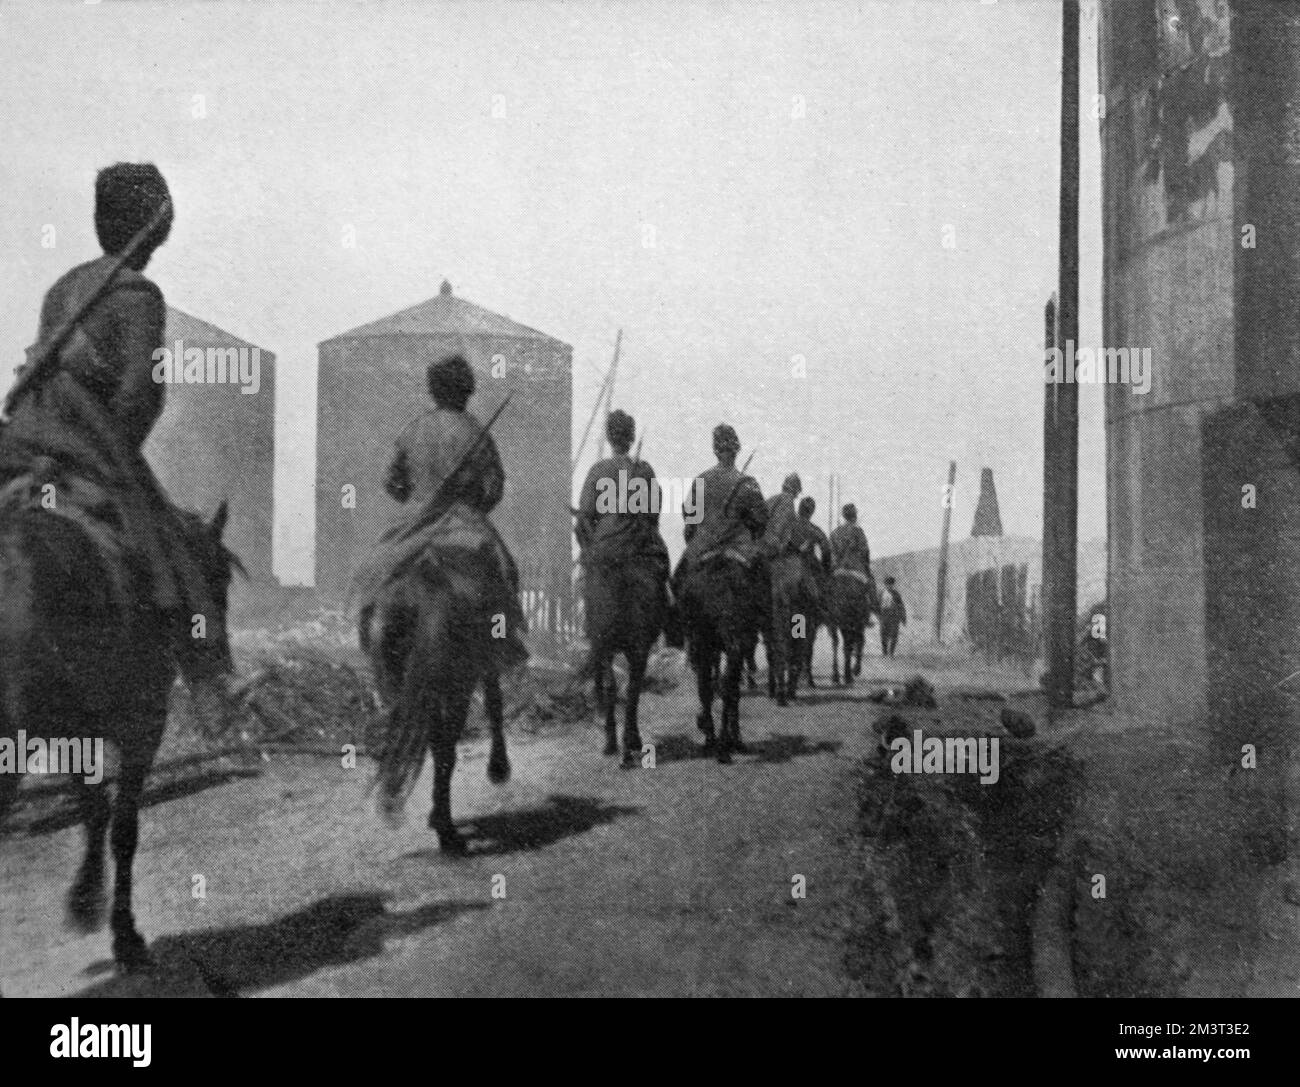 Cossack patrol in Balakhany, near Baku in Azerbaijan. Cossacks patrolling the oil fields after conflict between the Armenians and Tartars and subsequent fighting between the Tartars and Russian government troops led to destruction of the oil derricks that had covered the area. The massacres started during the Russian Revolution of 1905.     Date: 1905 Stock Photo